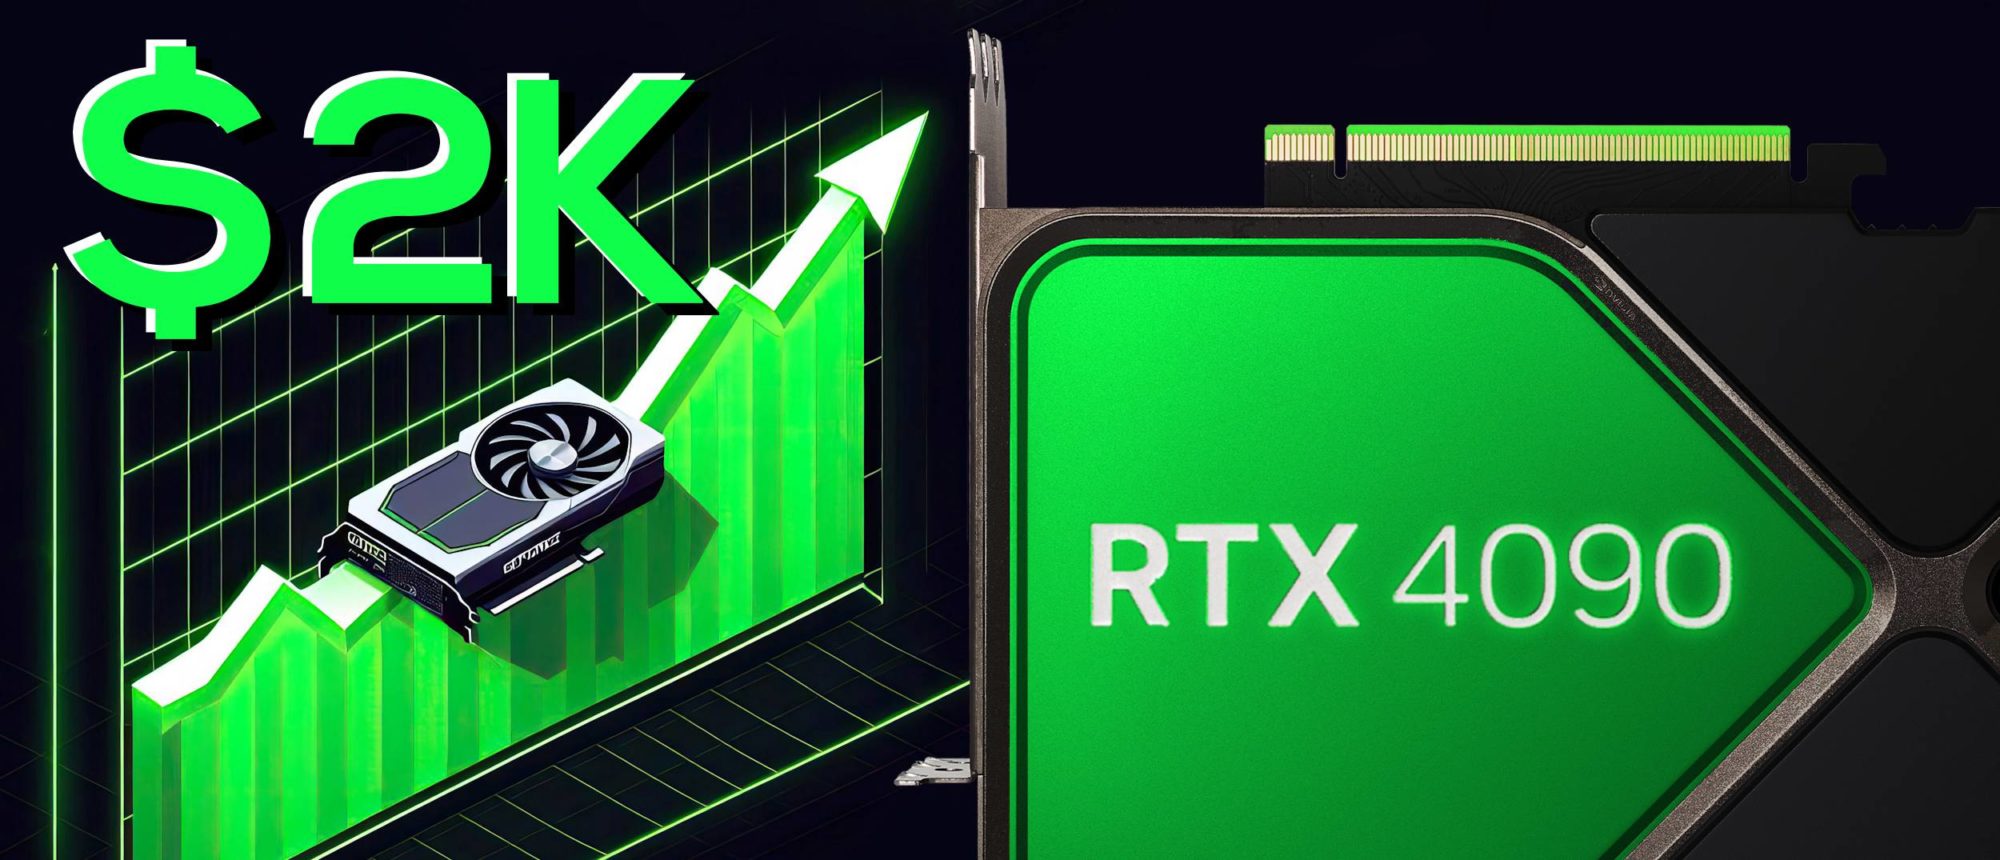 Nvidia GeForce RTX 4090 Review: Too much too soon - Reviewed